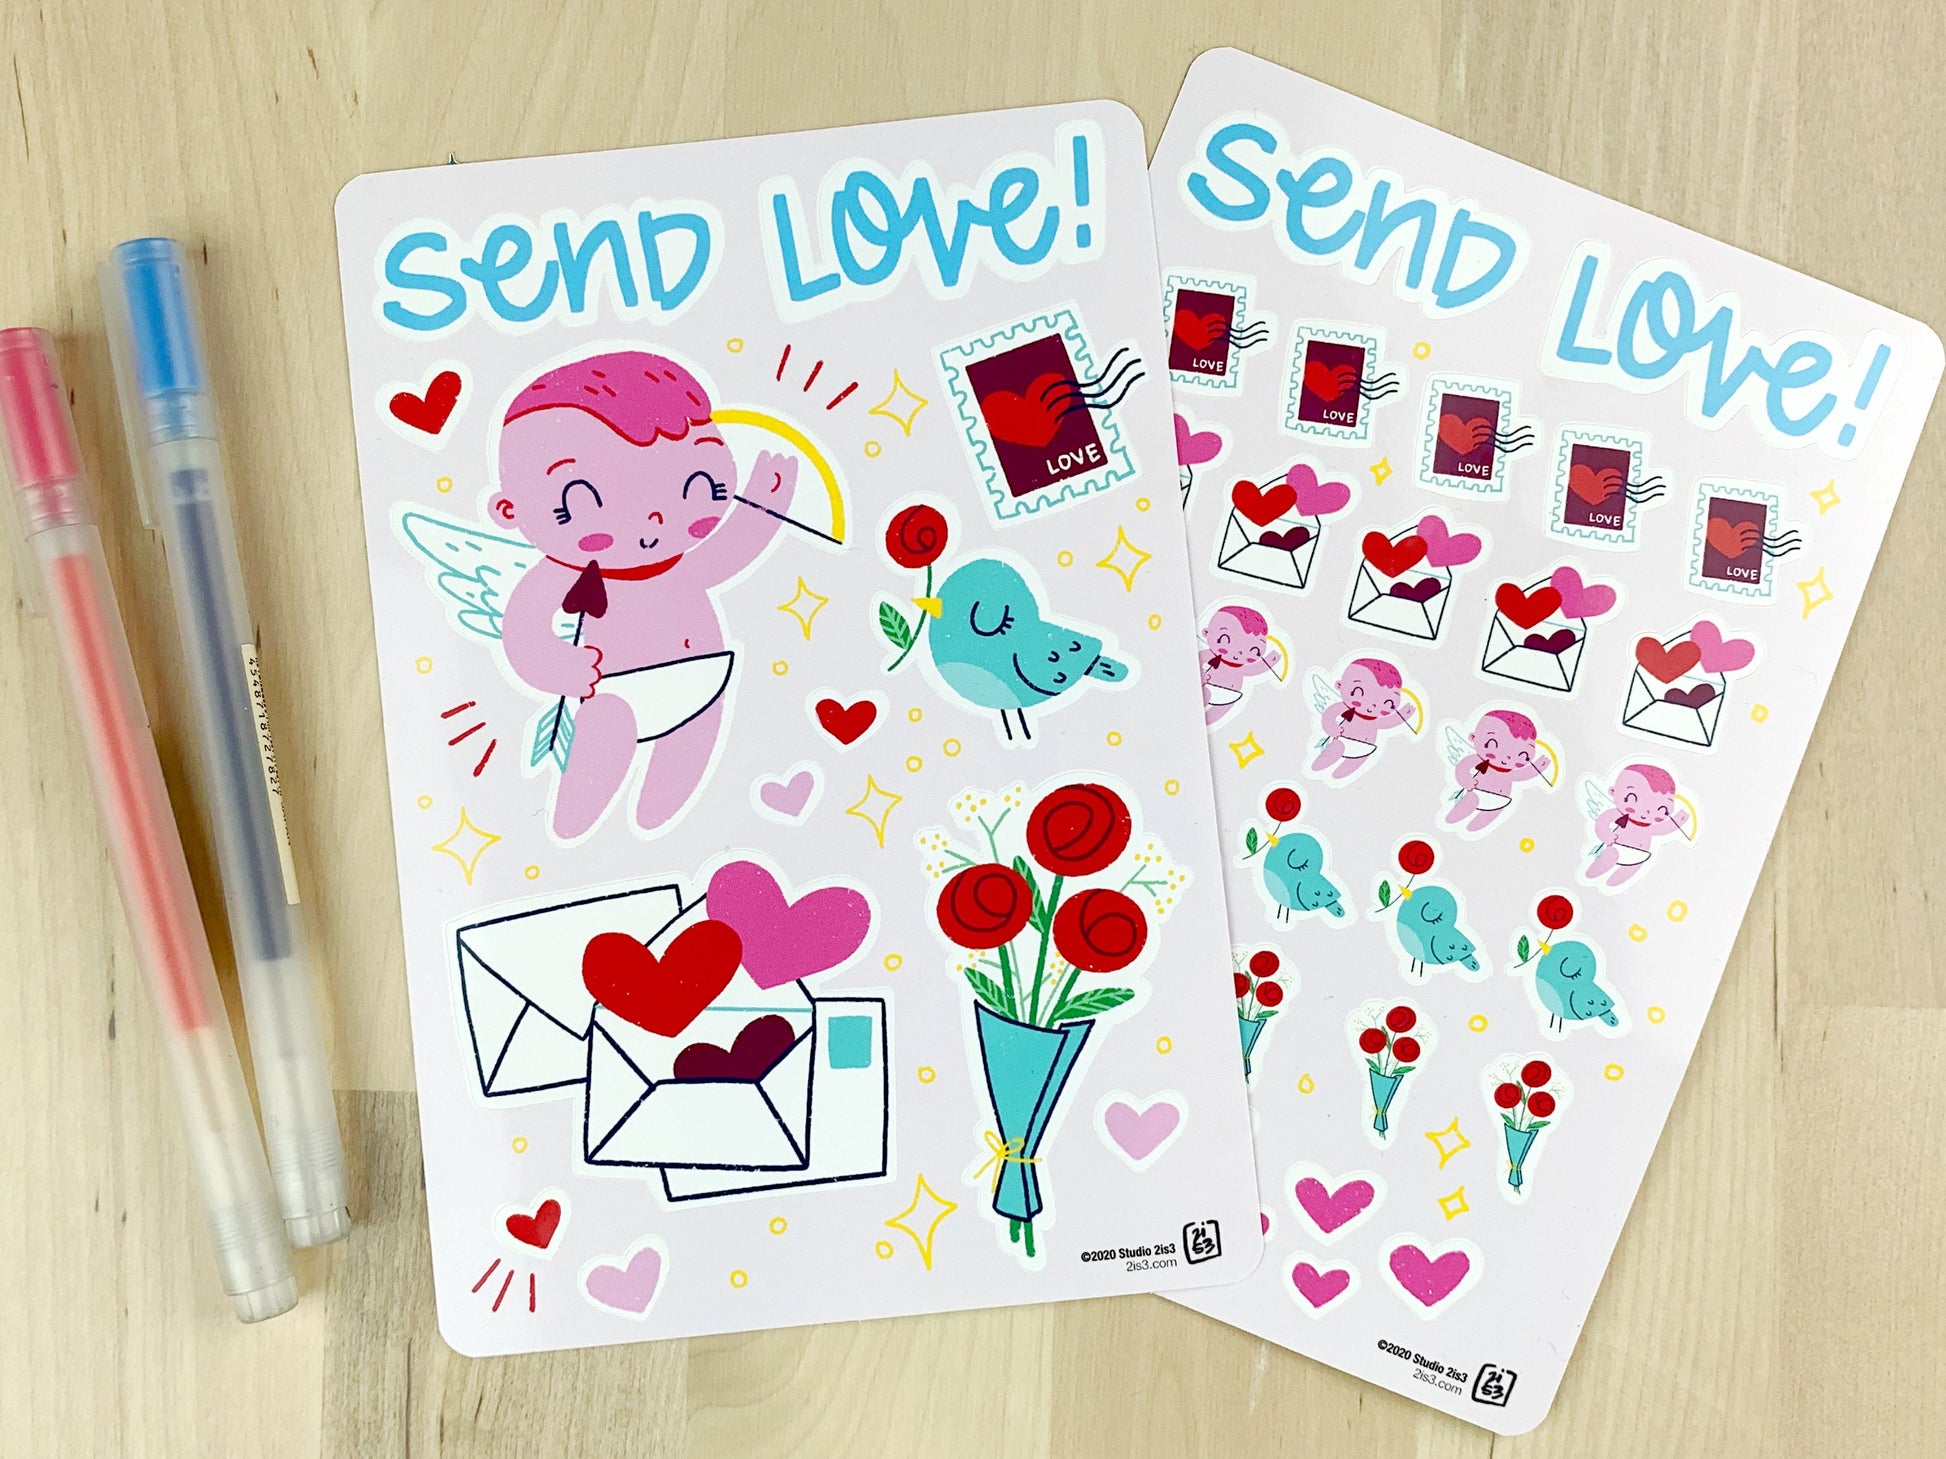 Two sticker sheets of cute little valentine's themed illustrations.